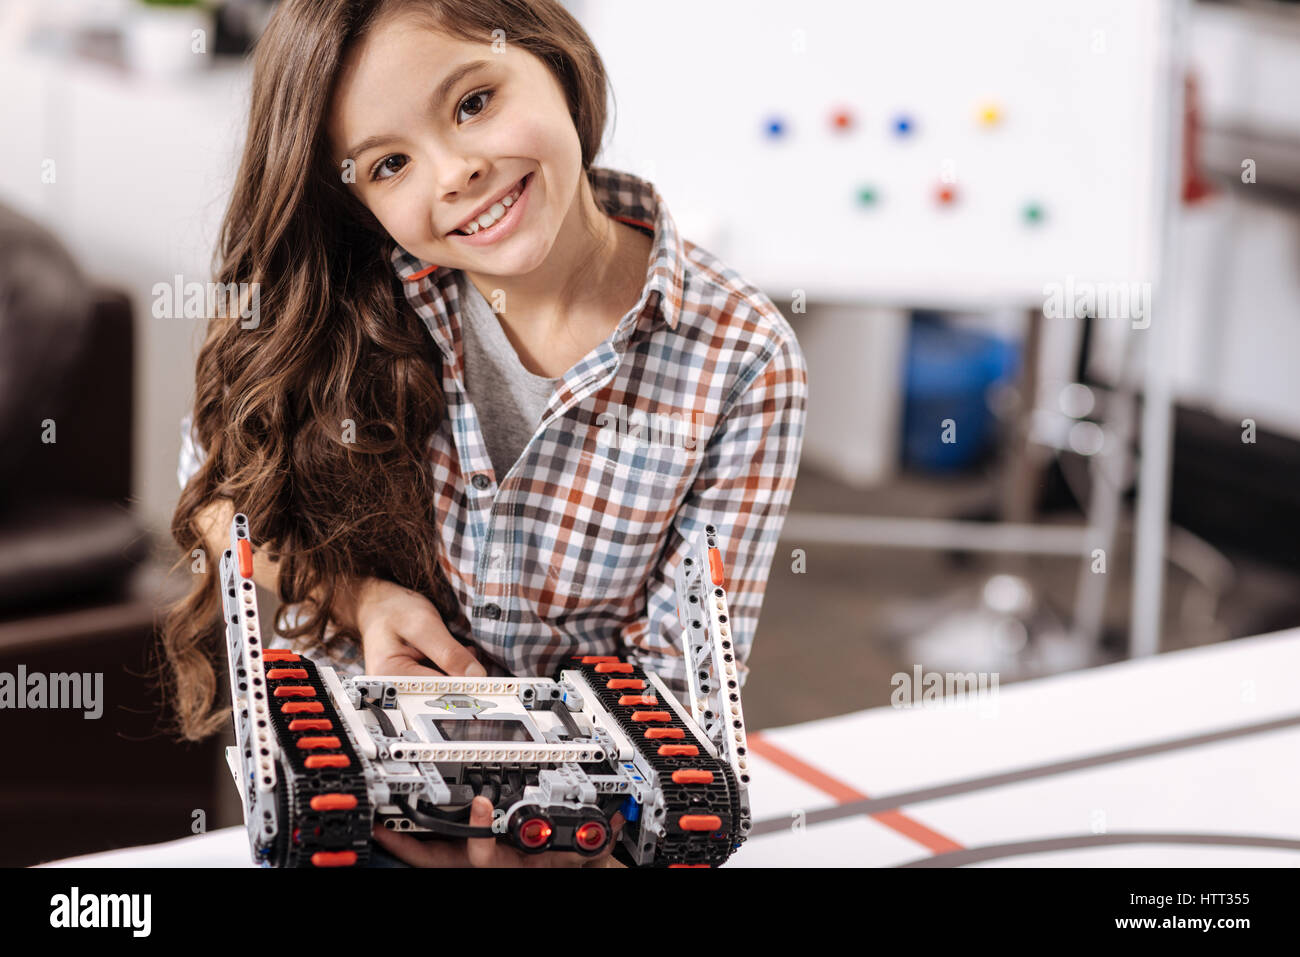 Smiling girl representing electronic toy at the robotics laboratory Stock Photo